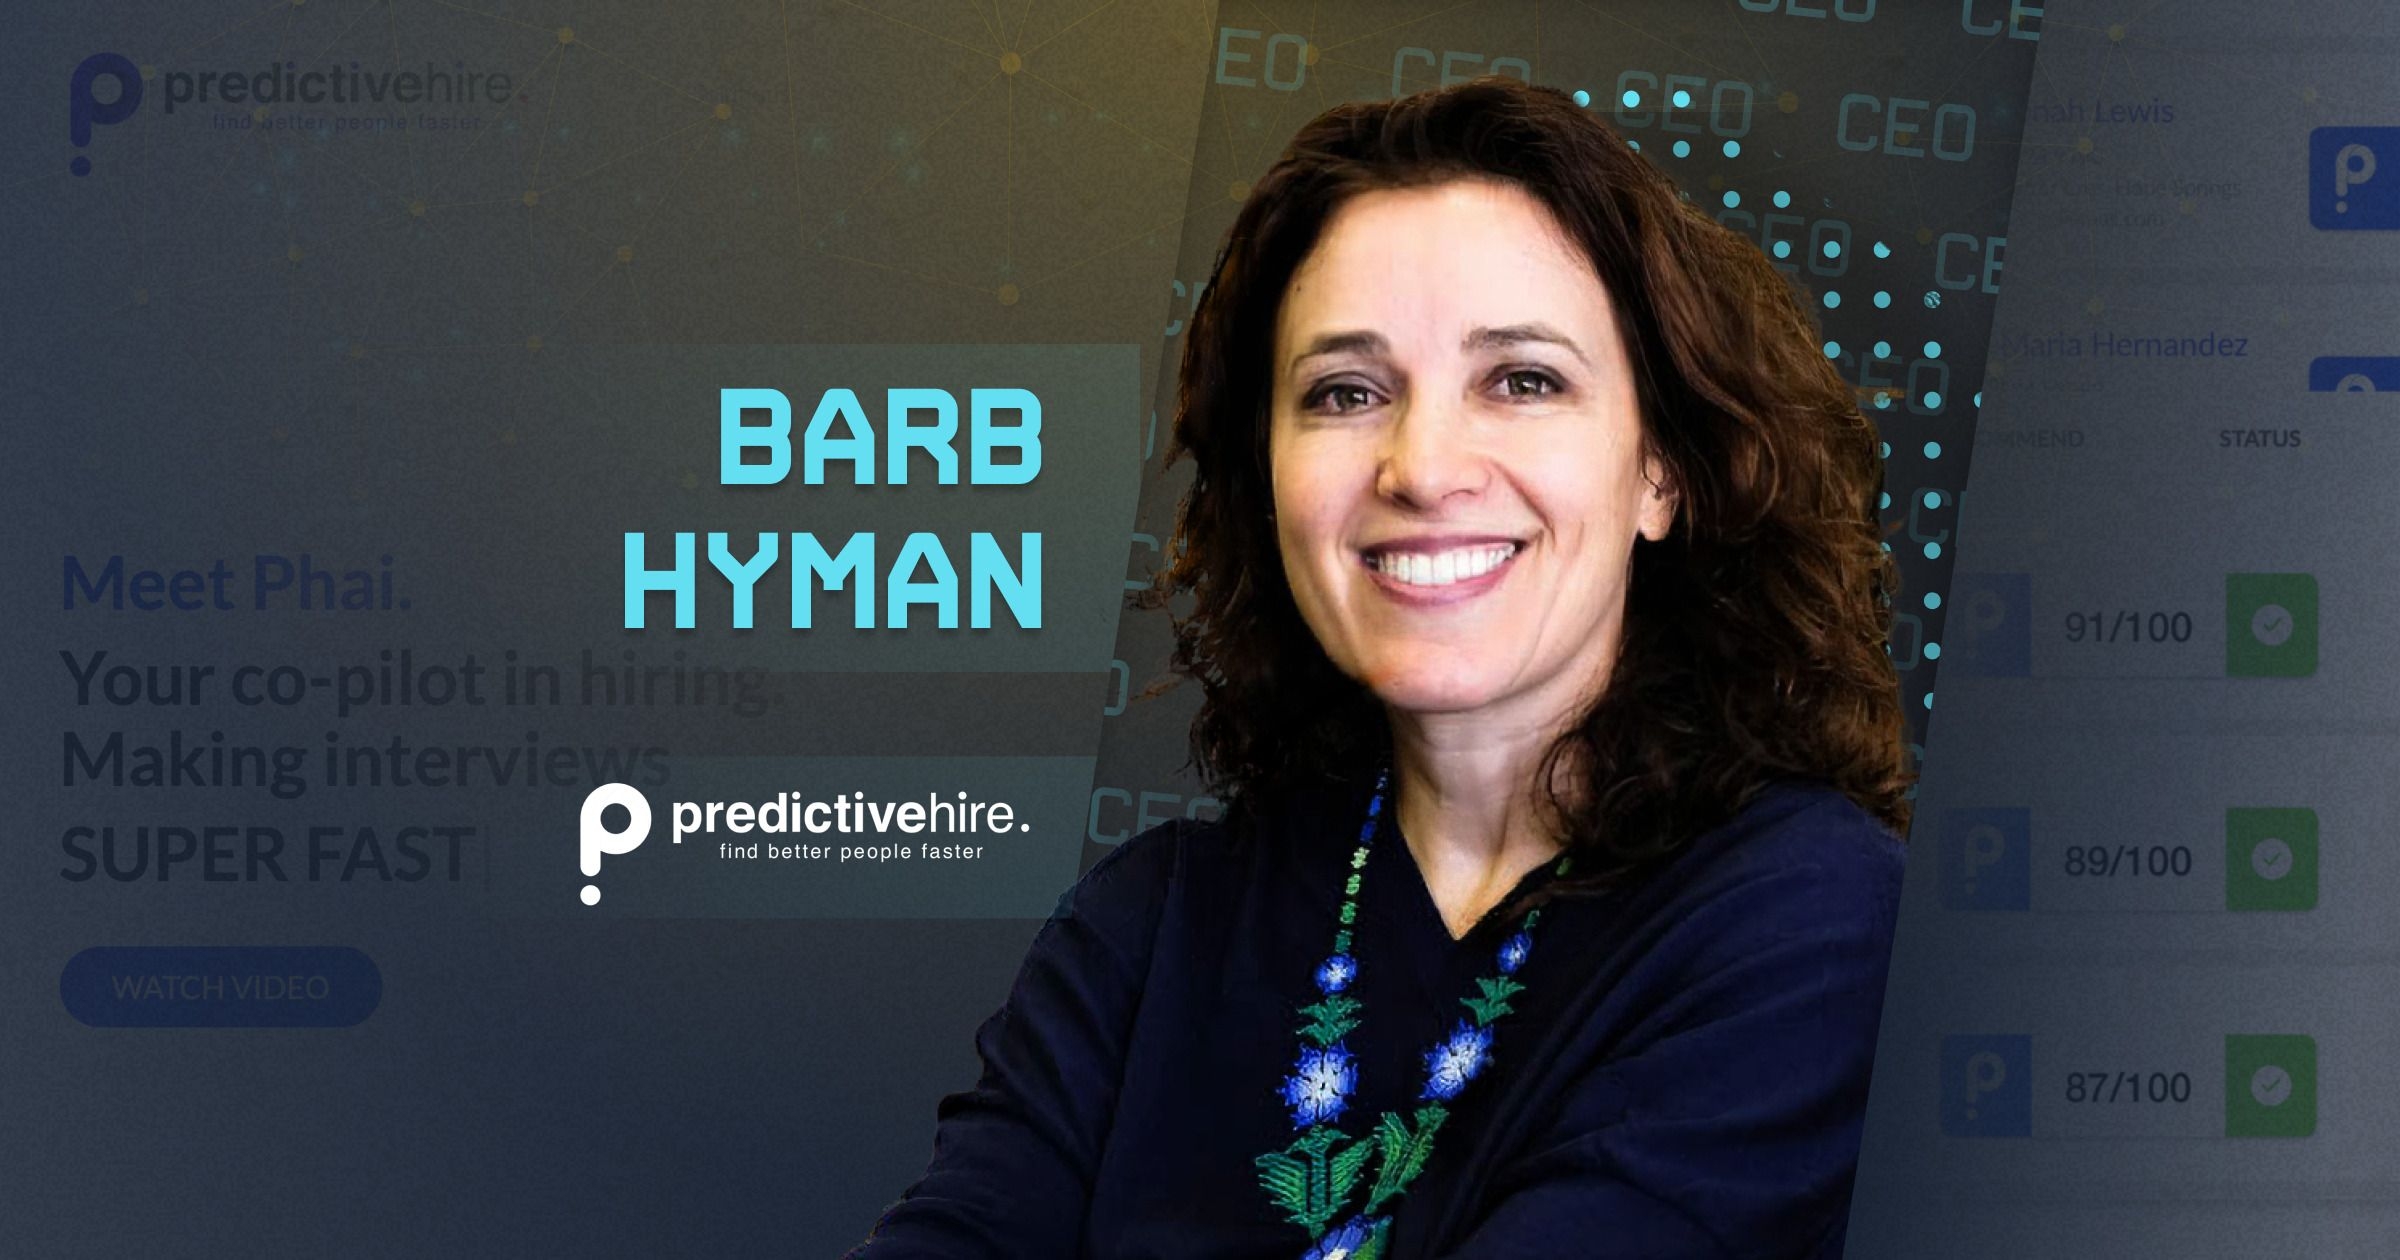 PredictiveHire CEO Barb Hyman: AI for candidate experience, assessment and hiring bias elimination